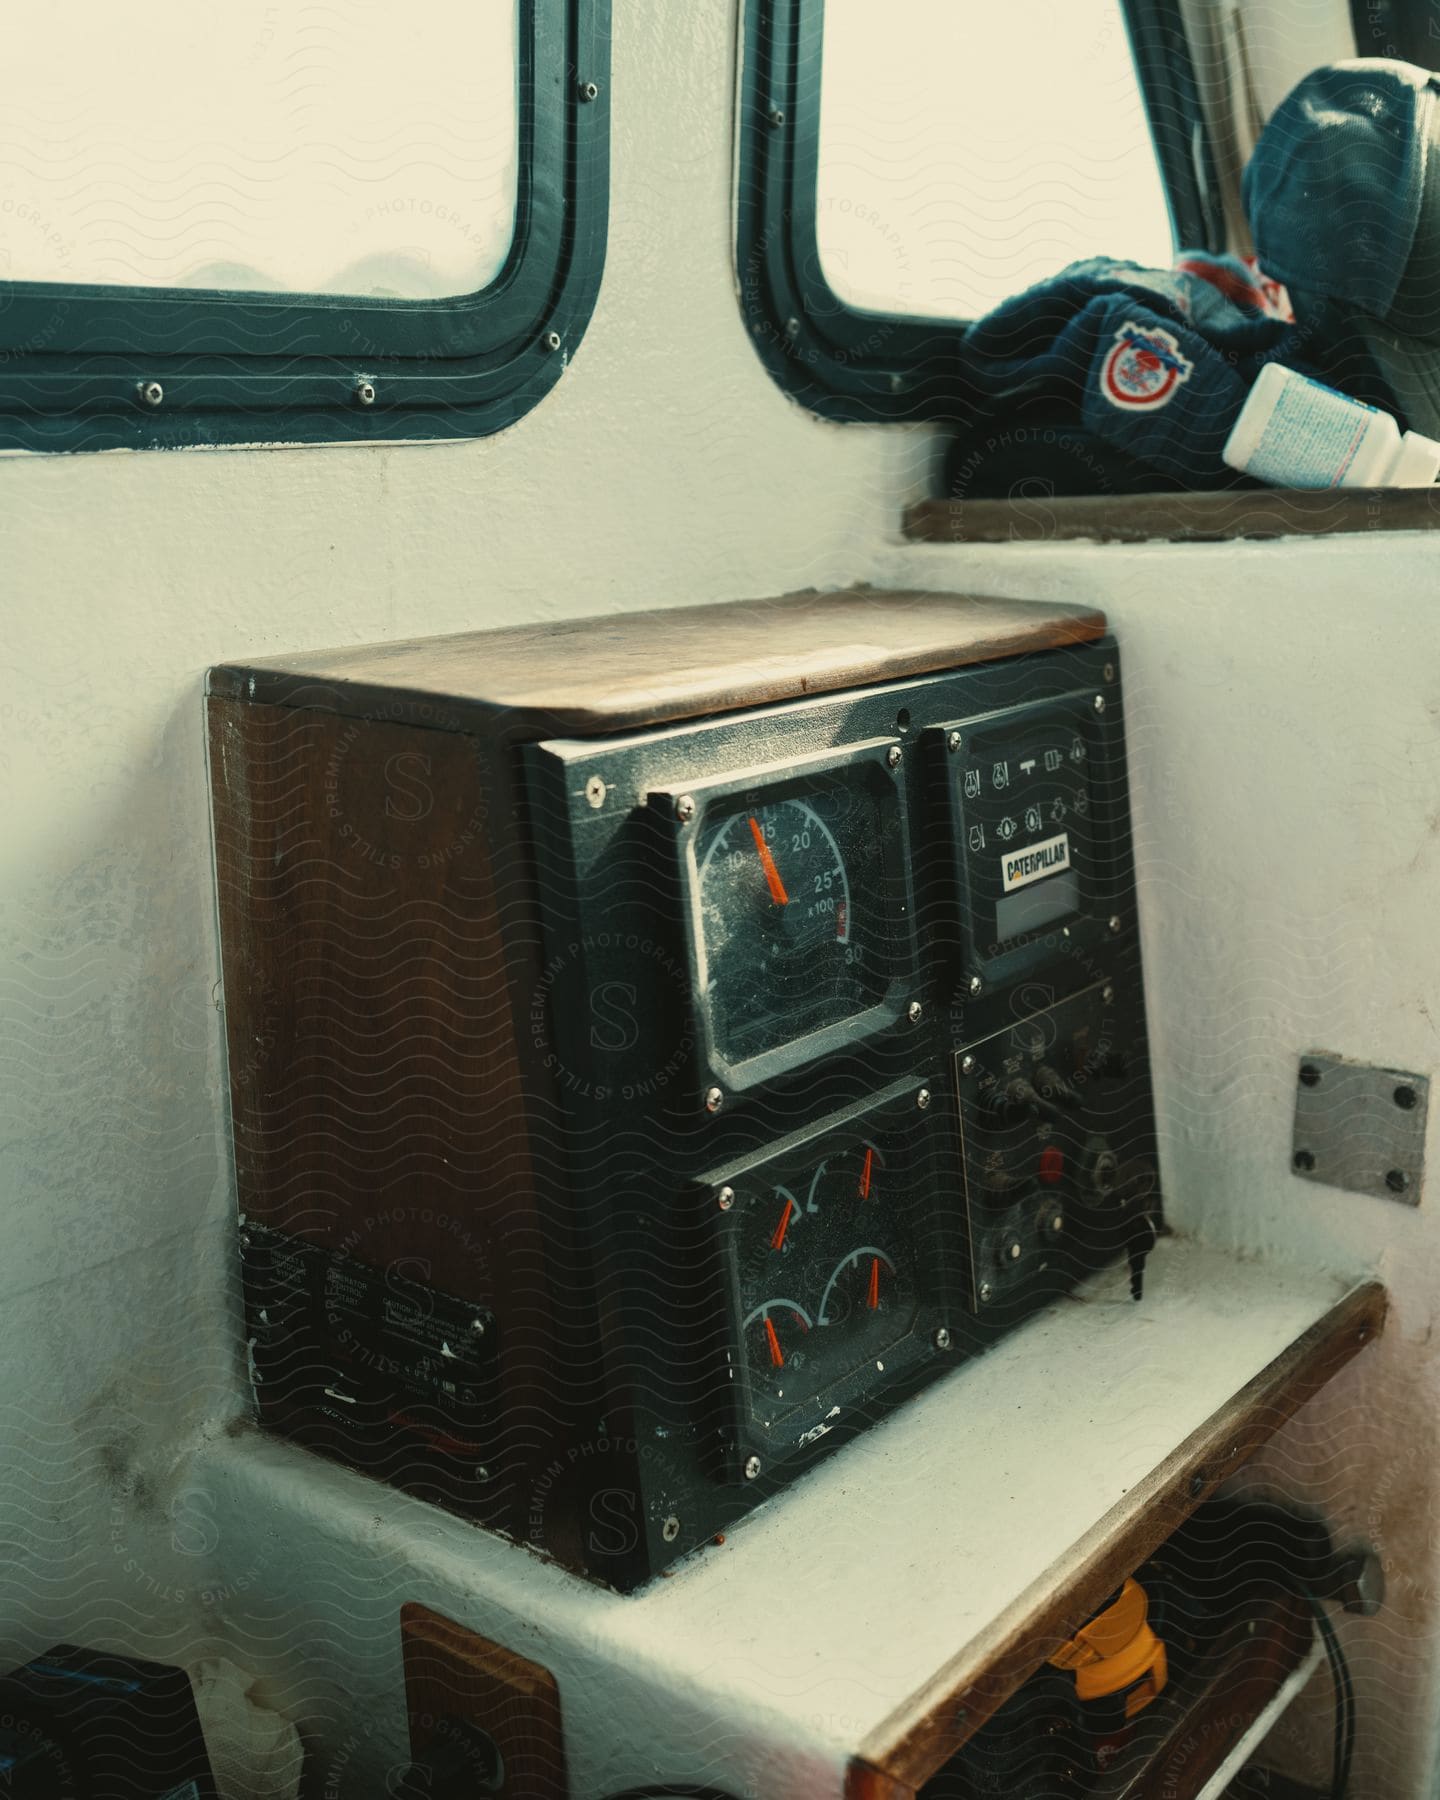 Stock photo of a closeup inside a boat of an old communication radio